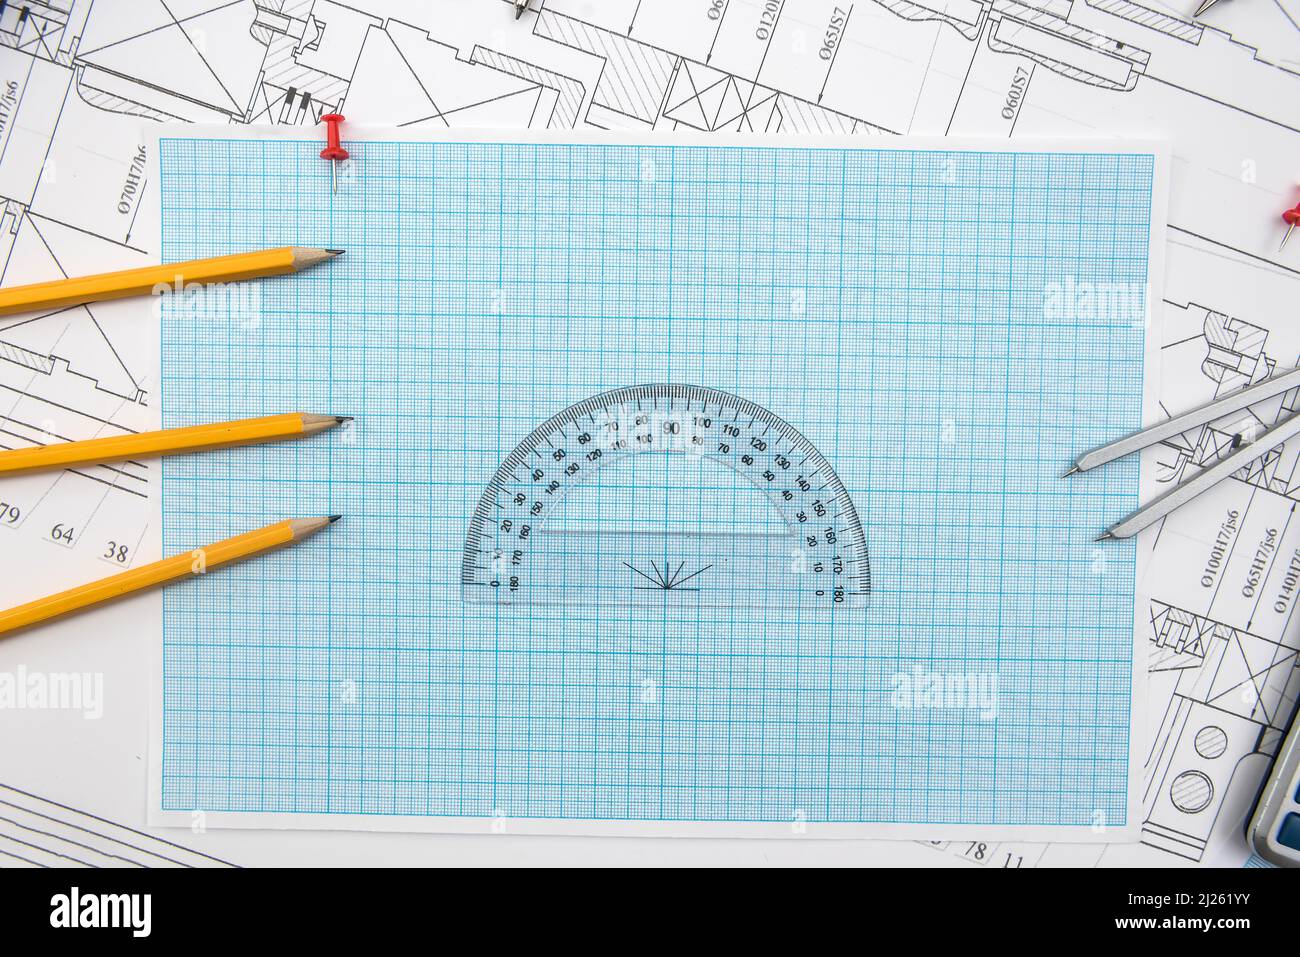 Technical drawing, graph paper and tools. Engineer  office team working with blueprints. Stock Photo